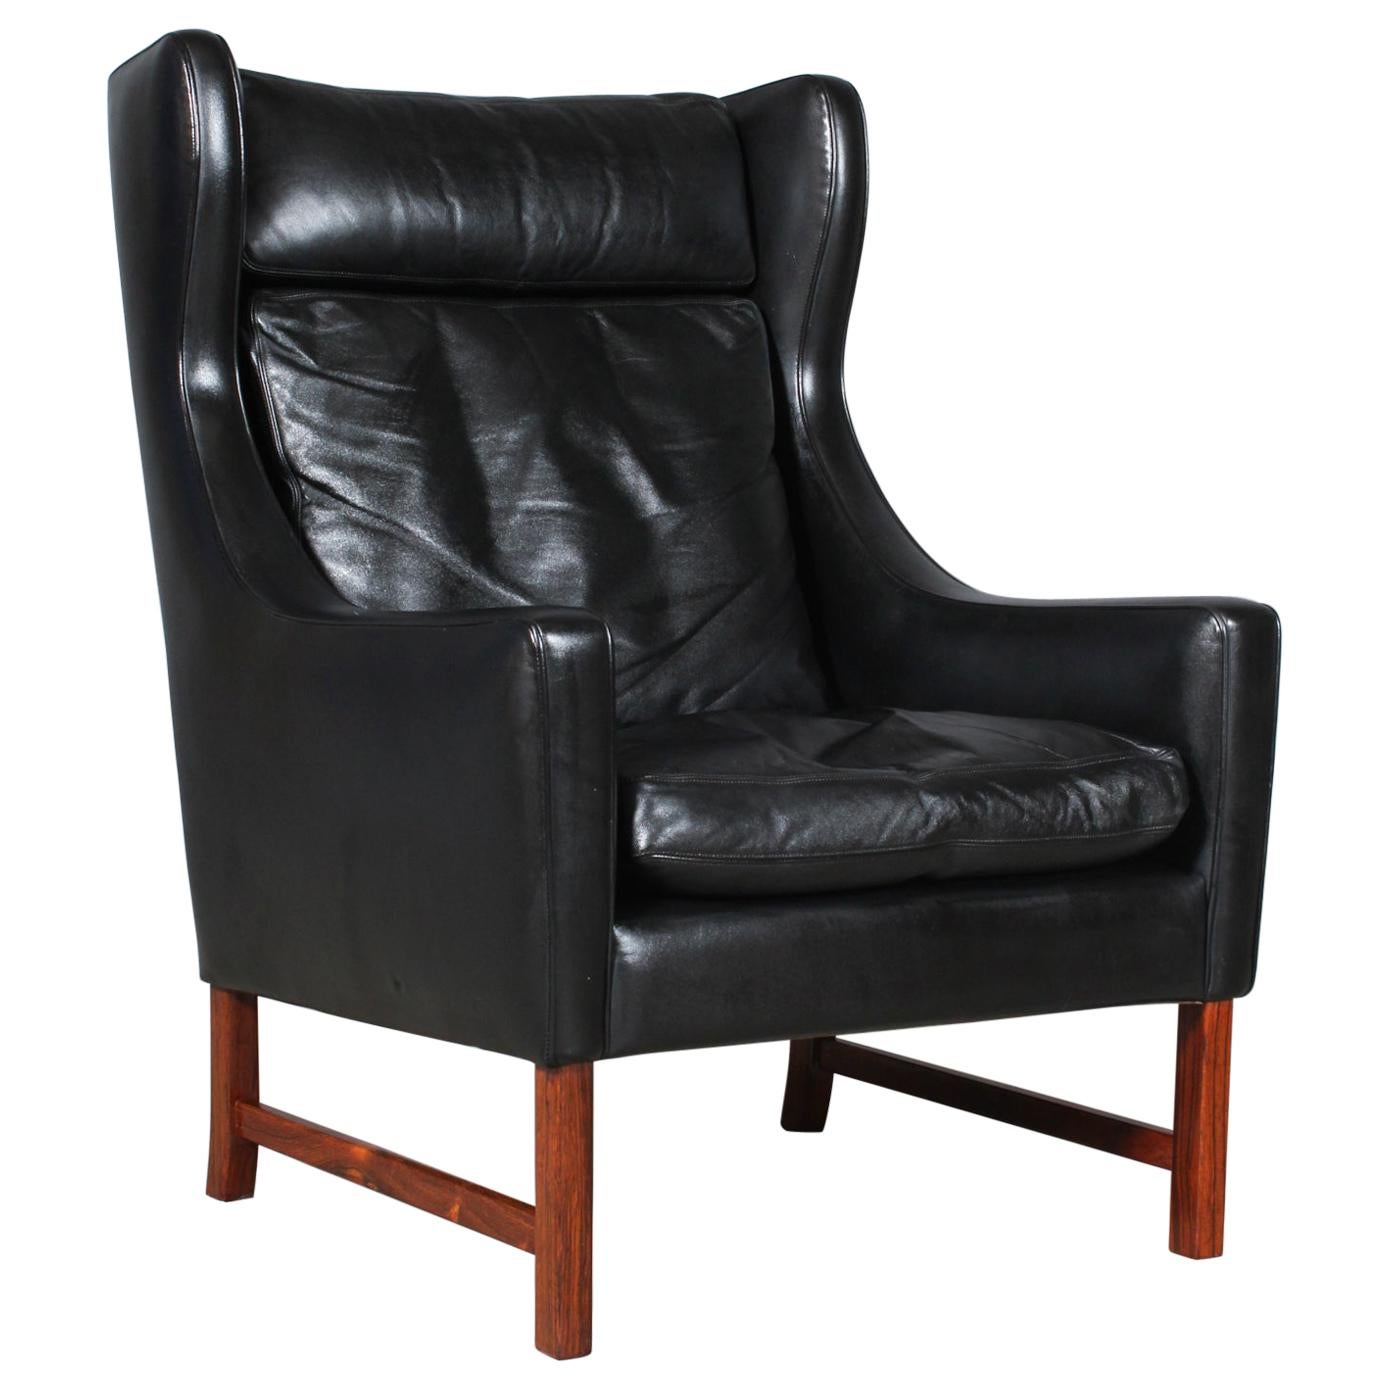 Frederik Kayser Wingback Chair, Rosewood and Leather, Norway